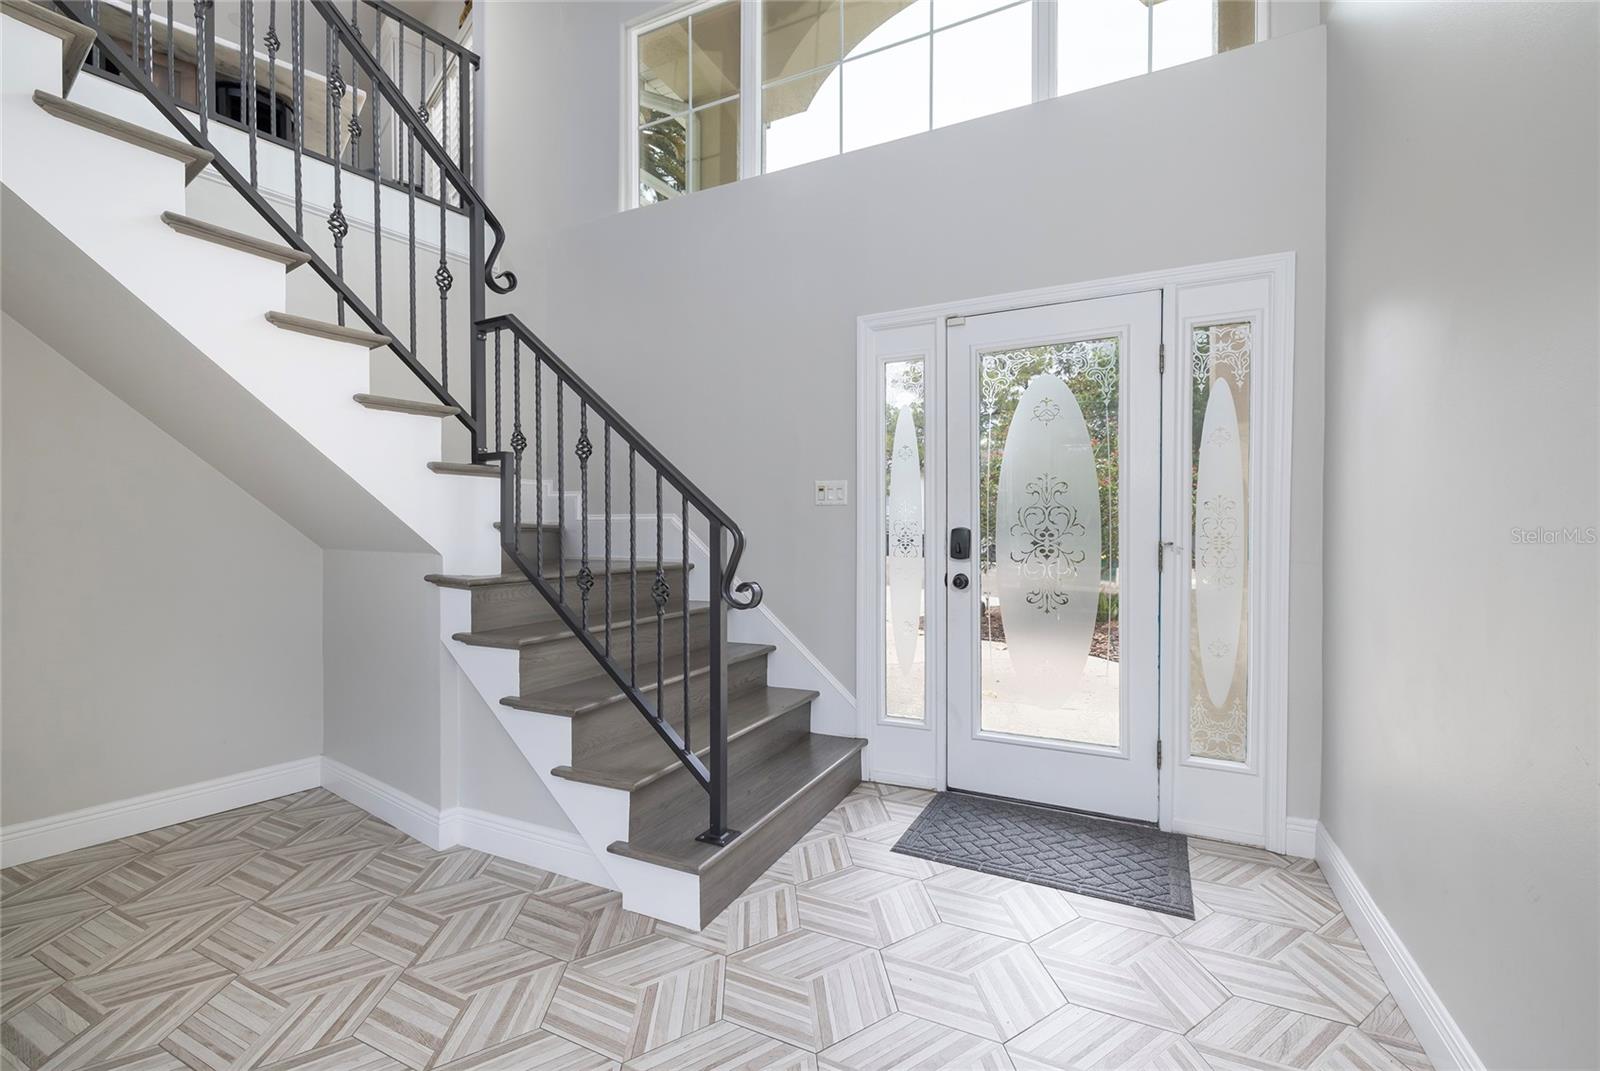 Entrance with beautiful tiled flooring and newly remodeled staircase